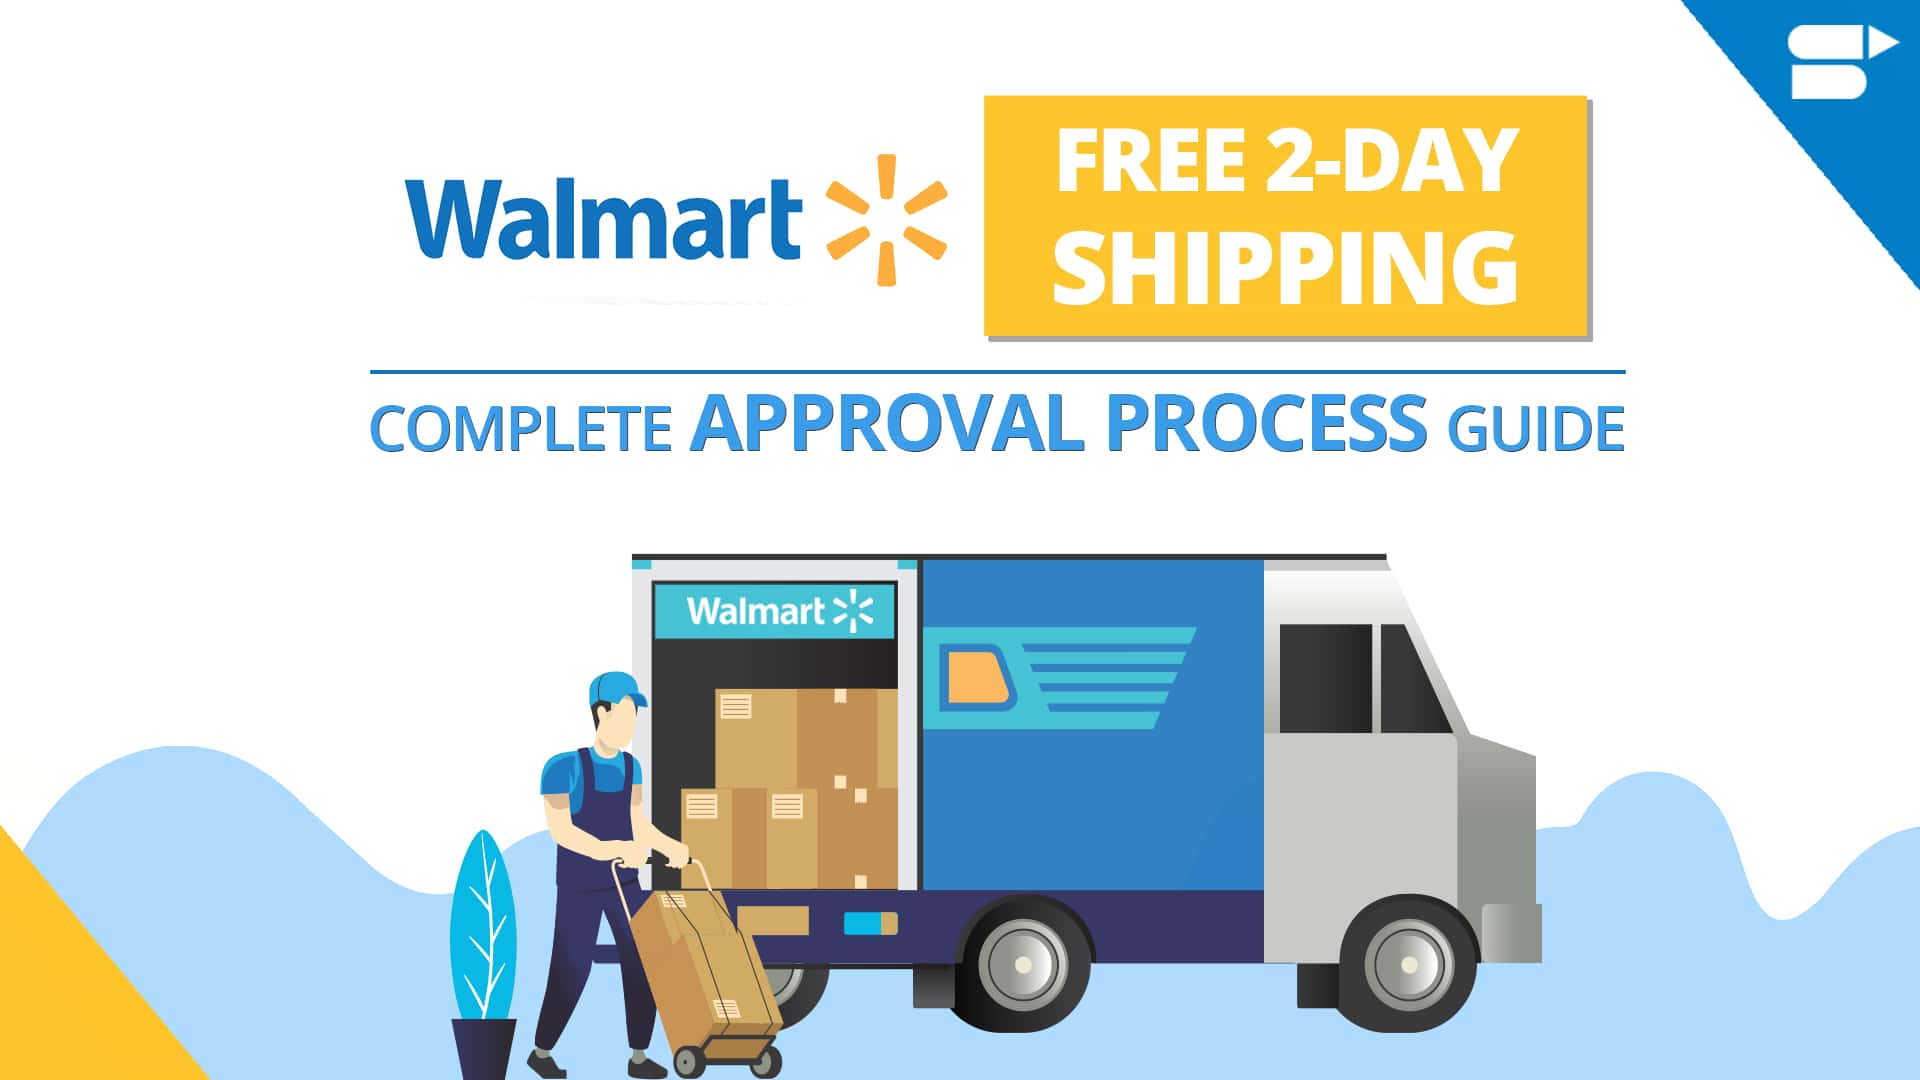 Walmart's marketplace items get free 2-day shipping, in-store